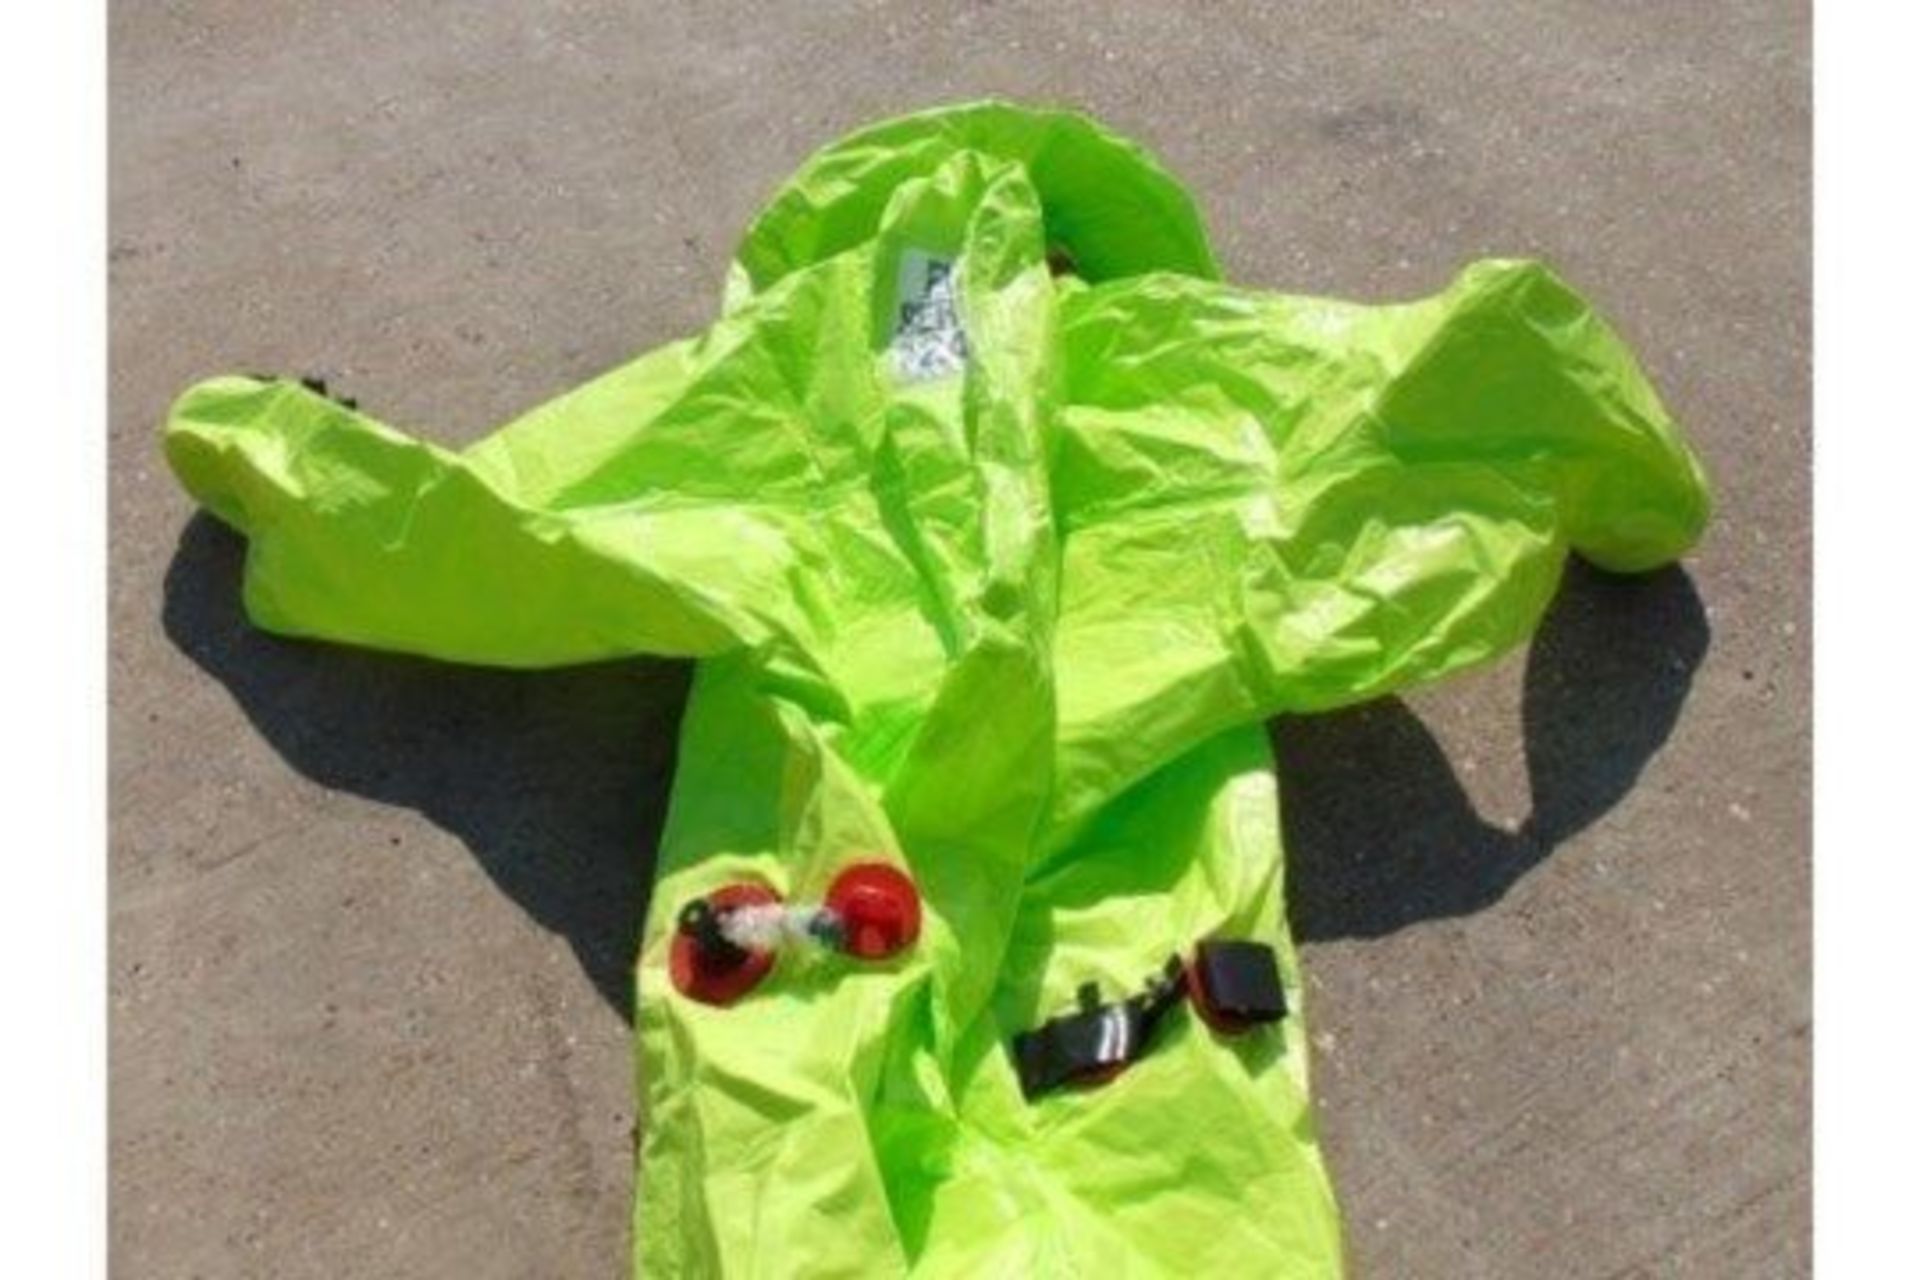 10 x Respirex Tychem TK Gas-Tight Hazmat Suit Type 1A with Attached Boots and Gloves. - Bild 7 aus 10